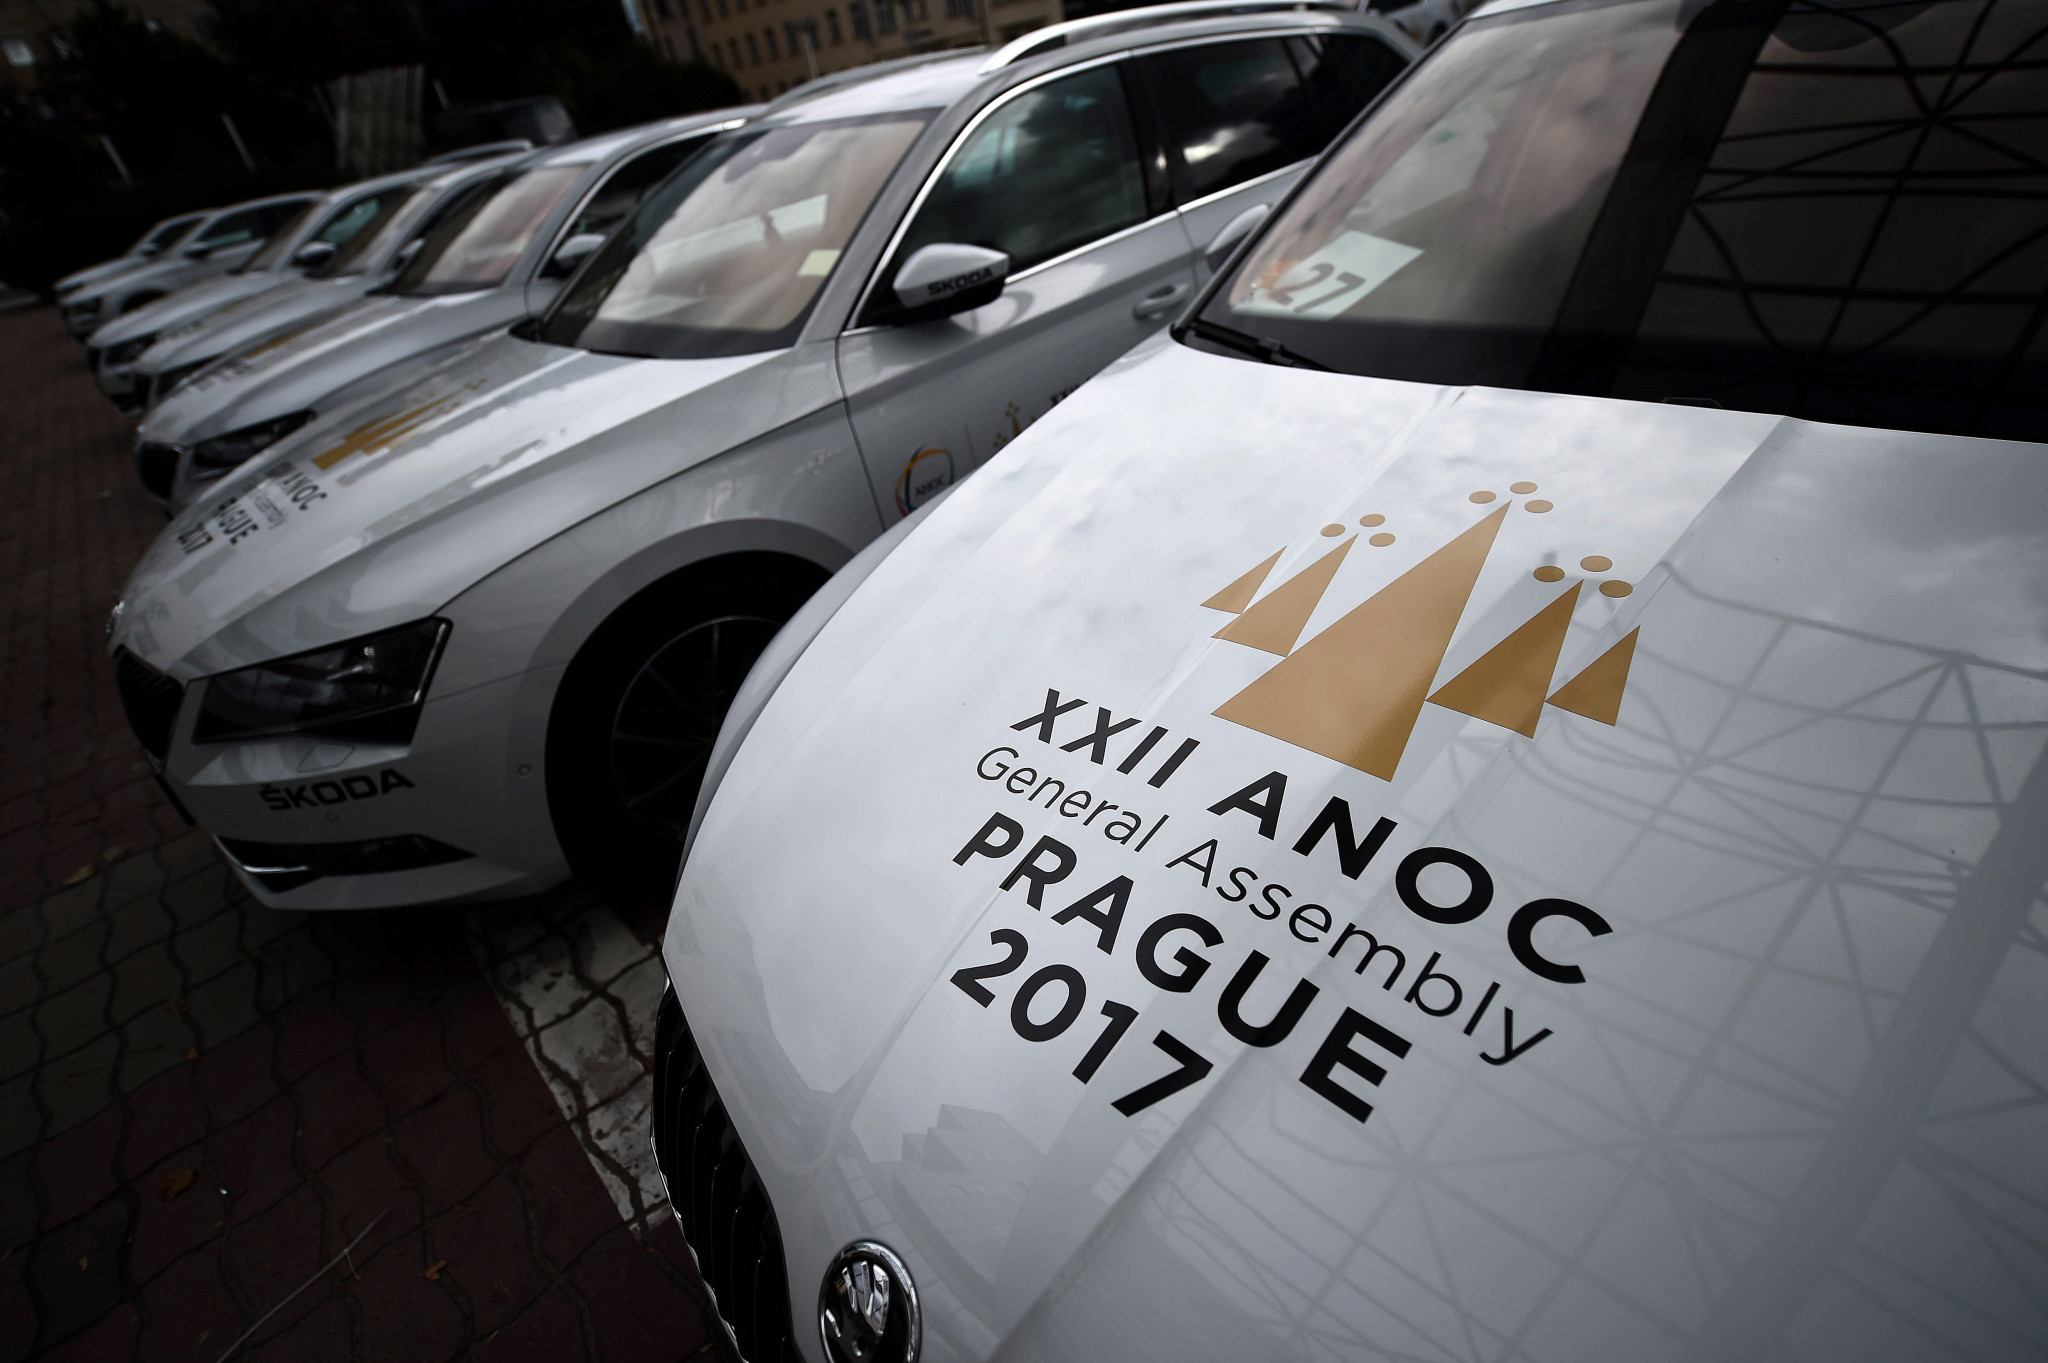 ANOC branded cars on hand for delegates outside the Hilton Hotel ©Getty Images